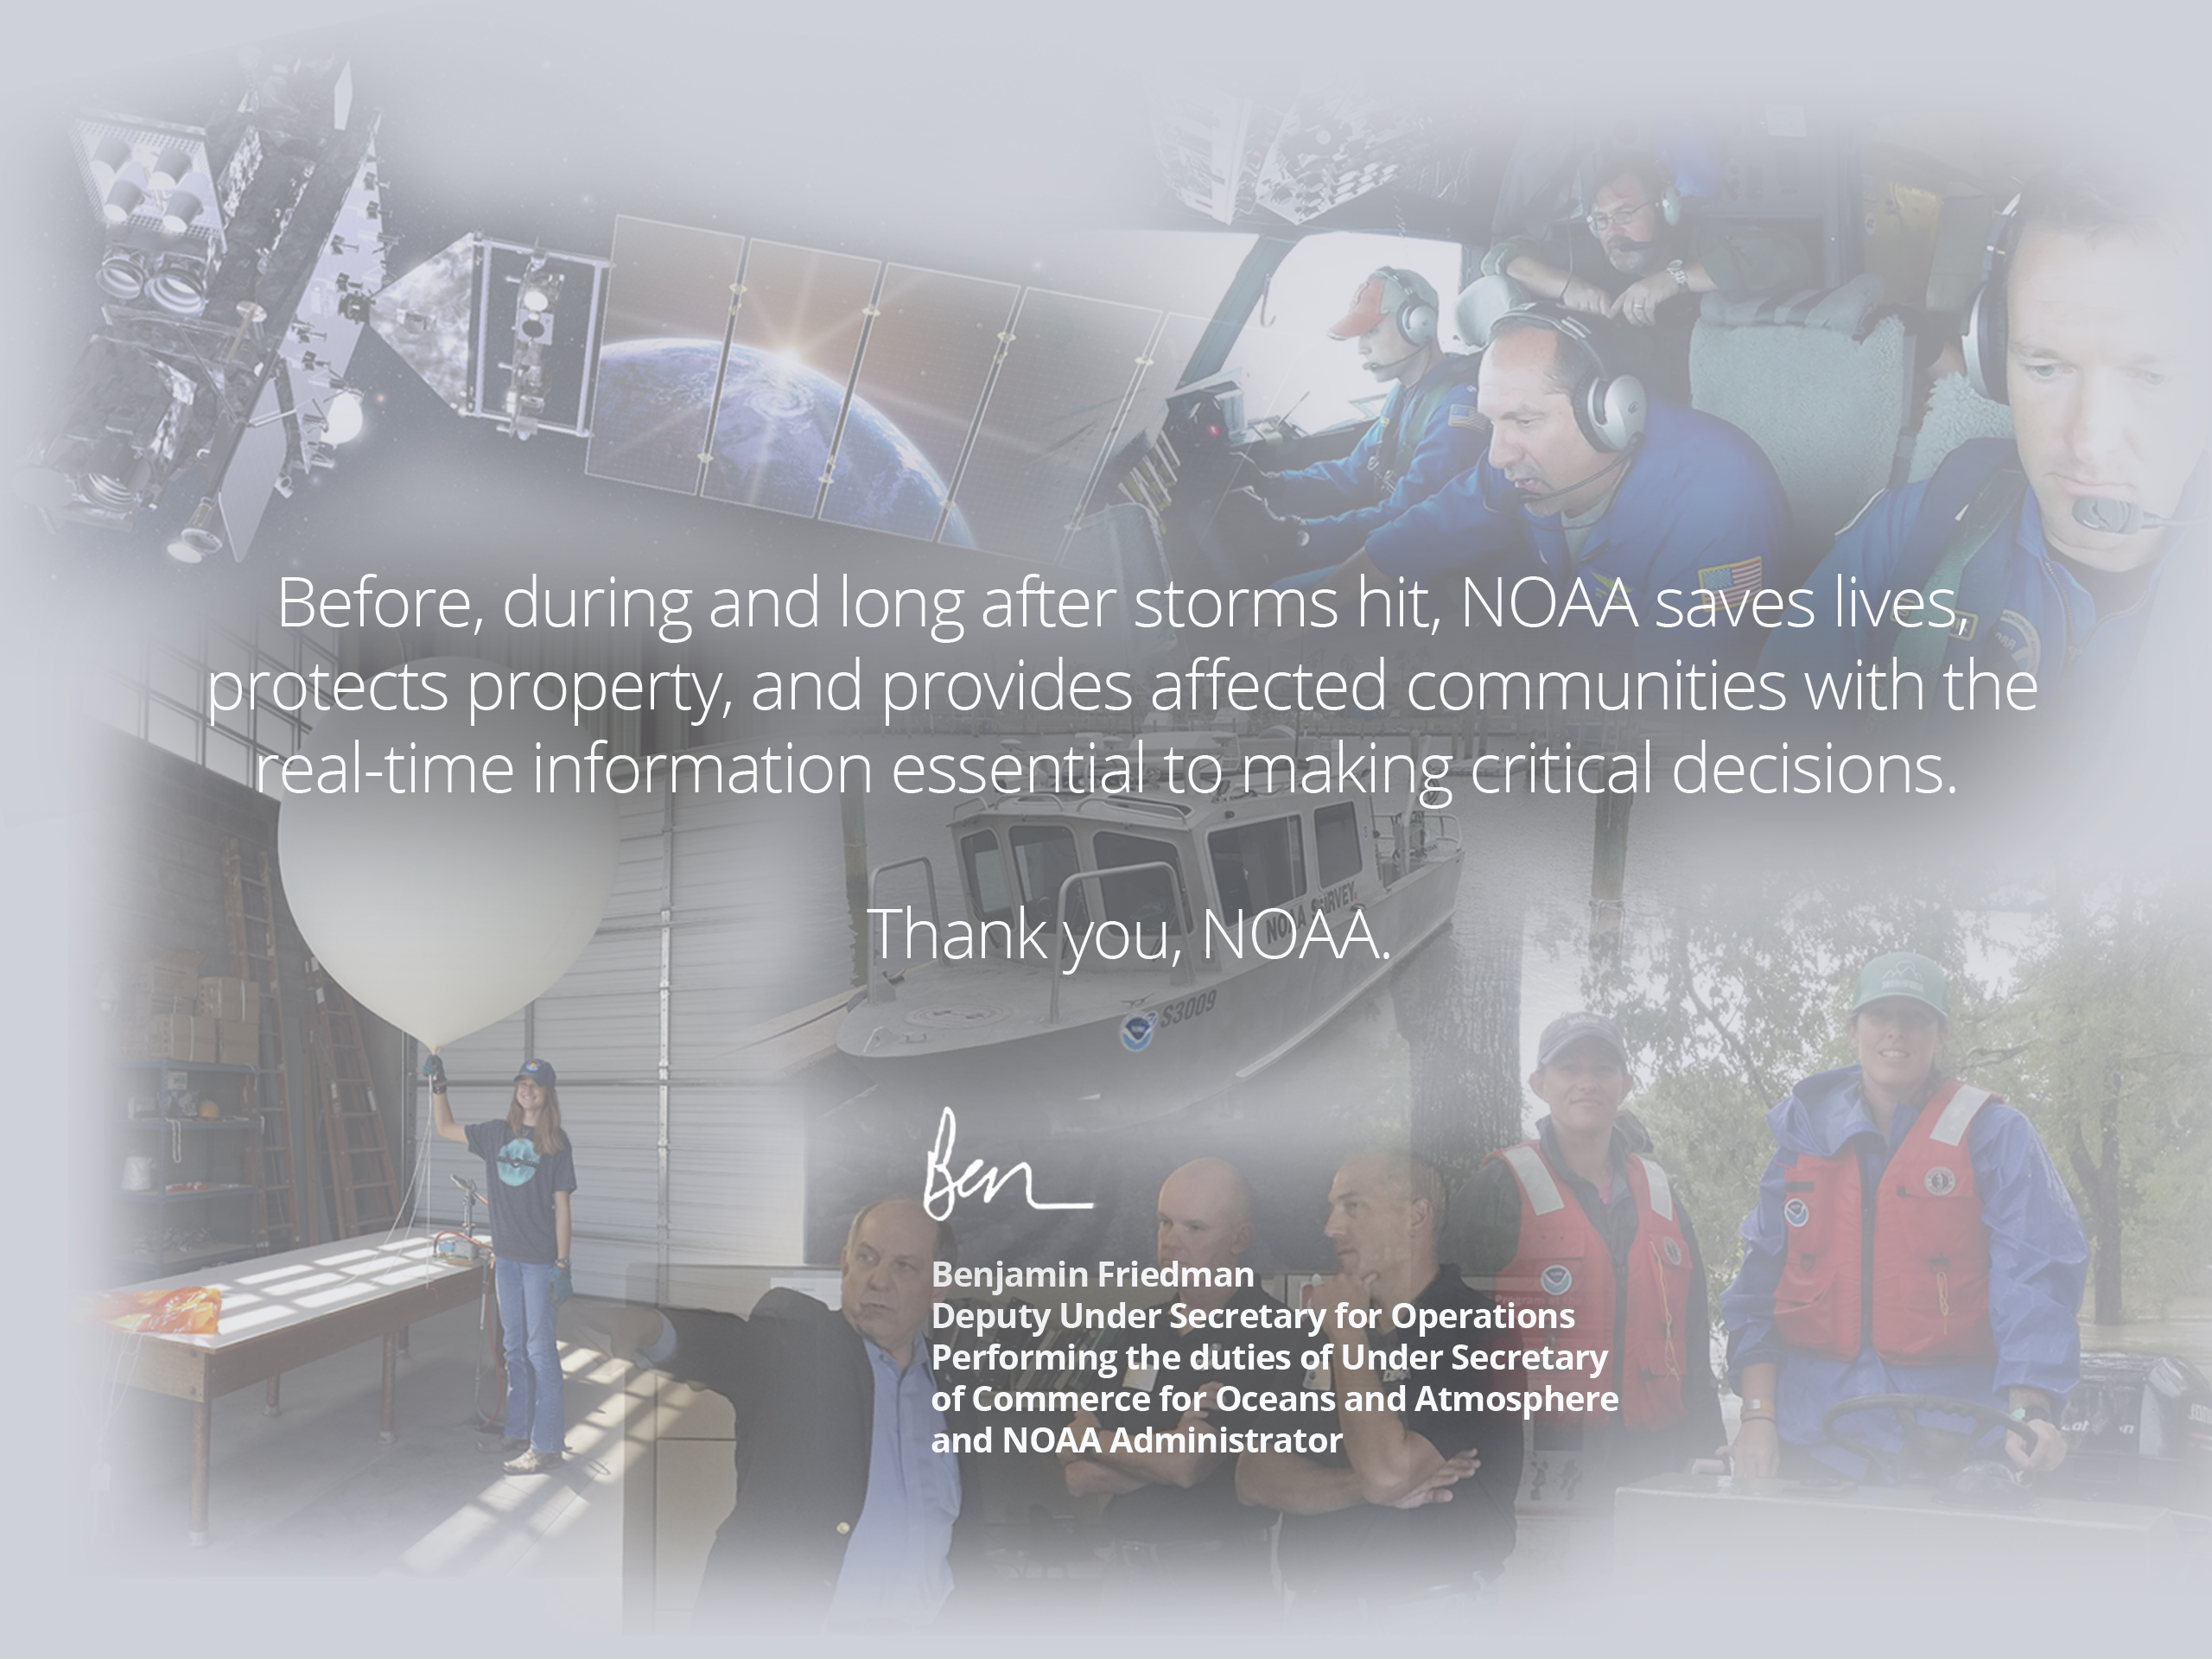 Before, during and long after storms hit, NOAA saves lives, protects property, and provides affected communities with the real-time information essential to making critical decisions.